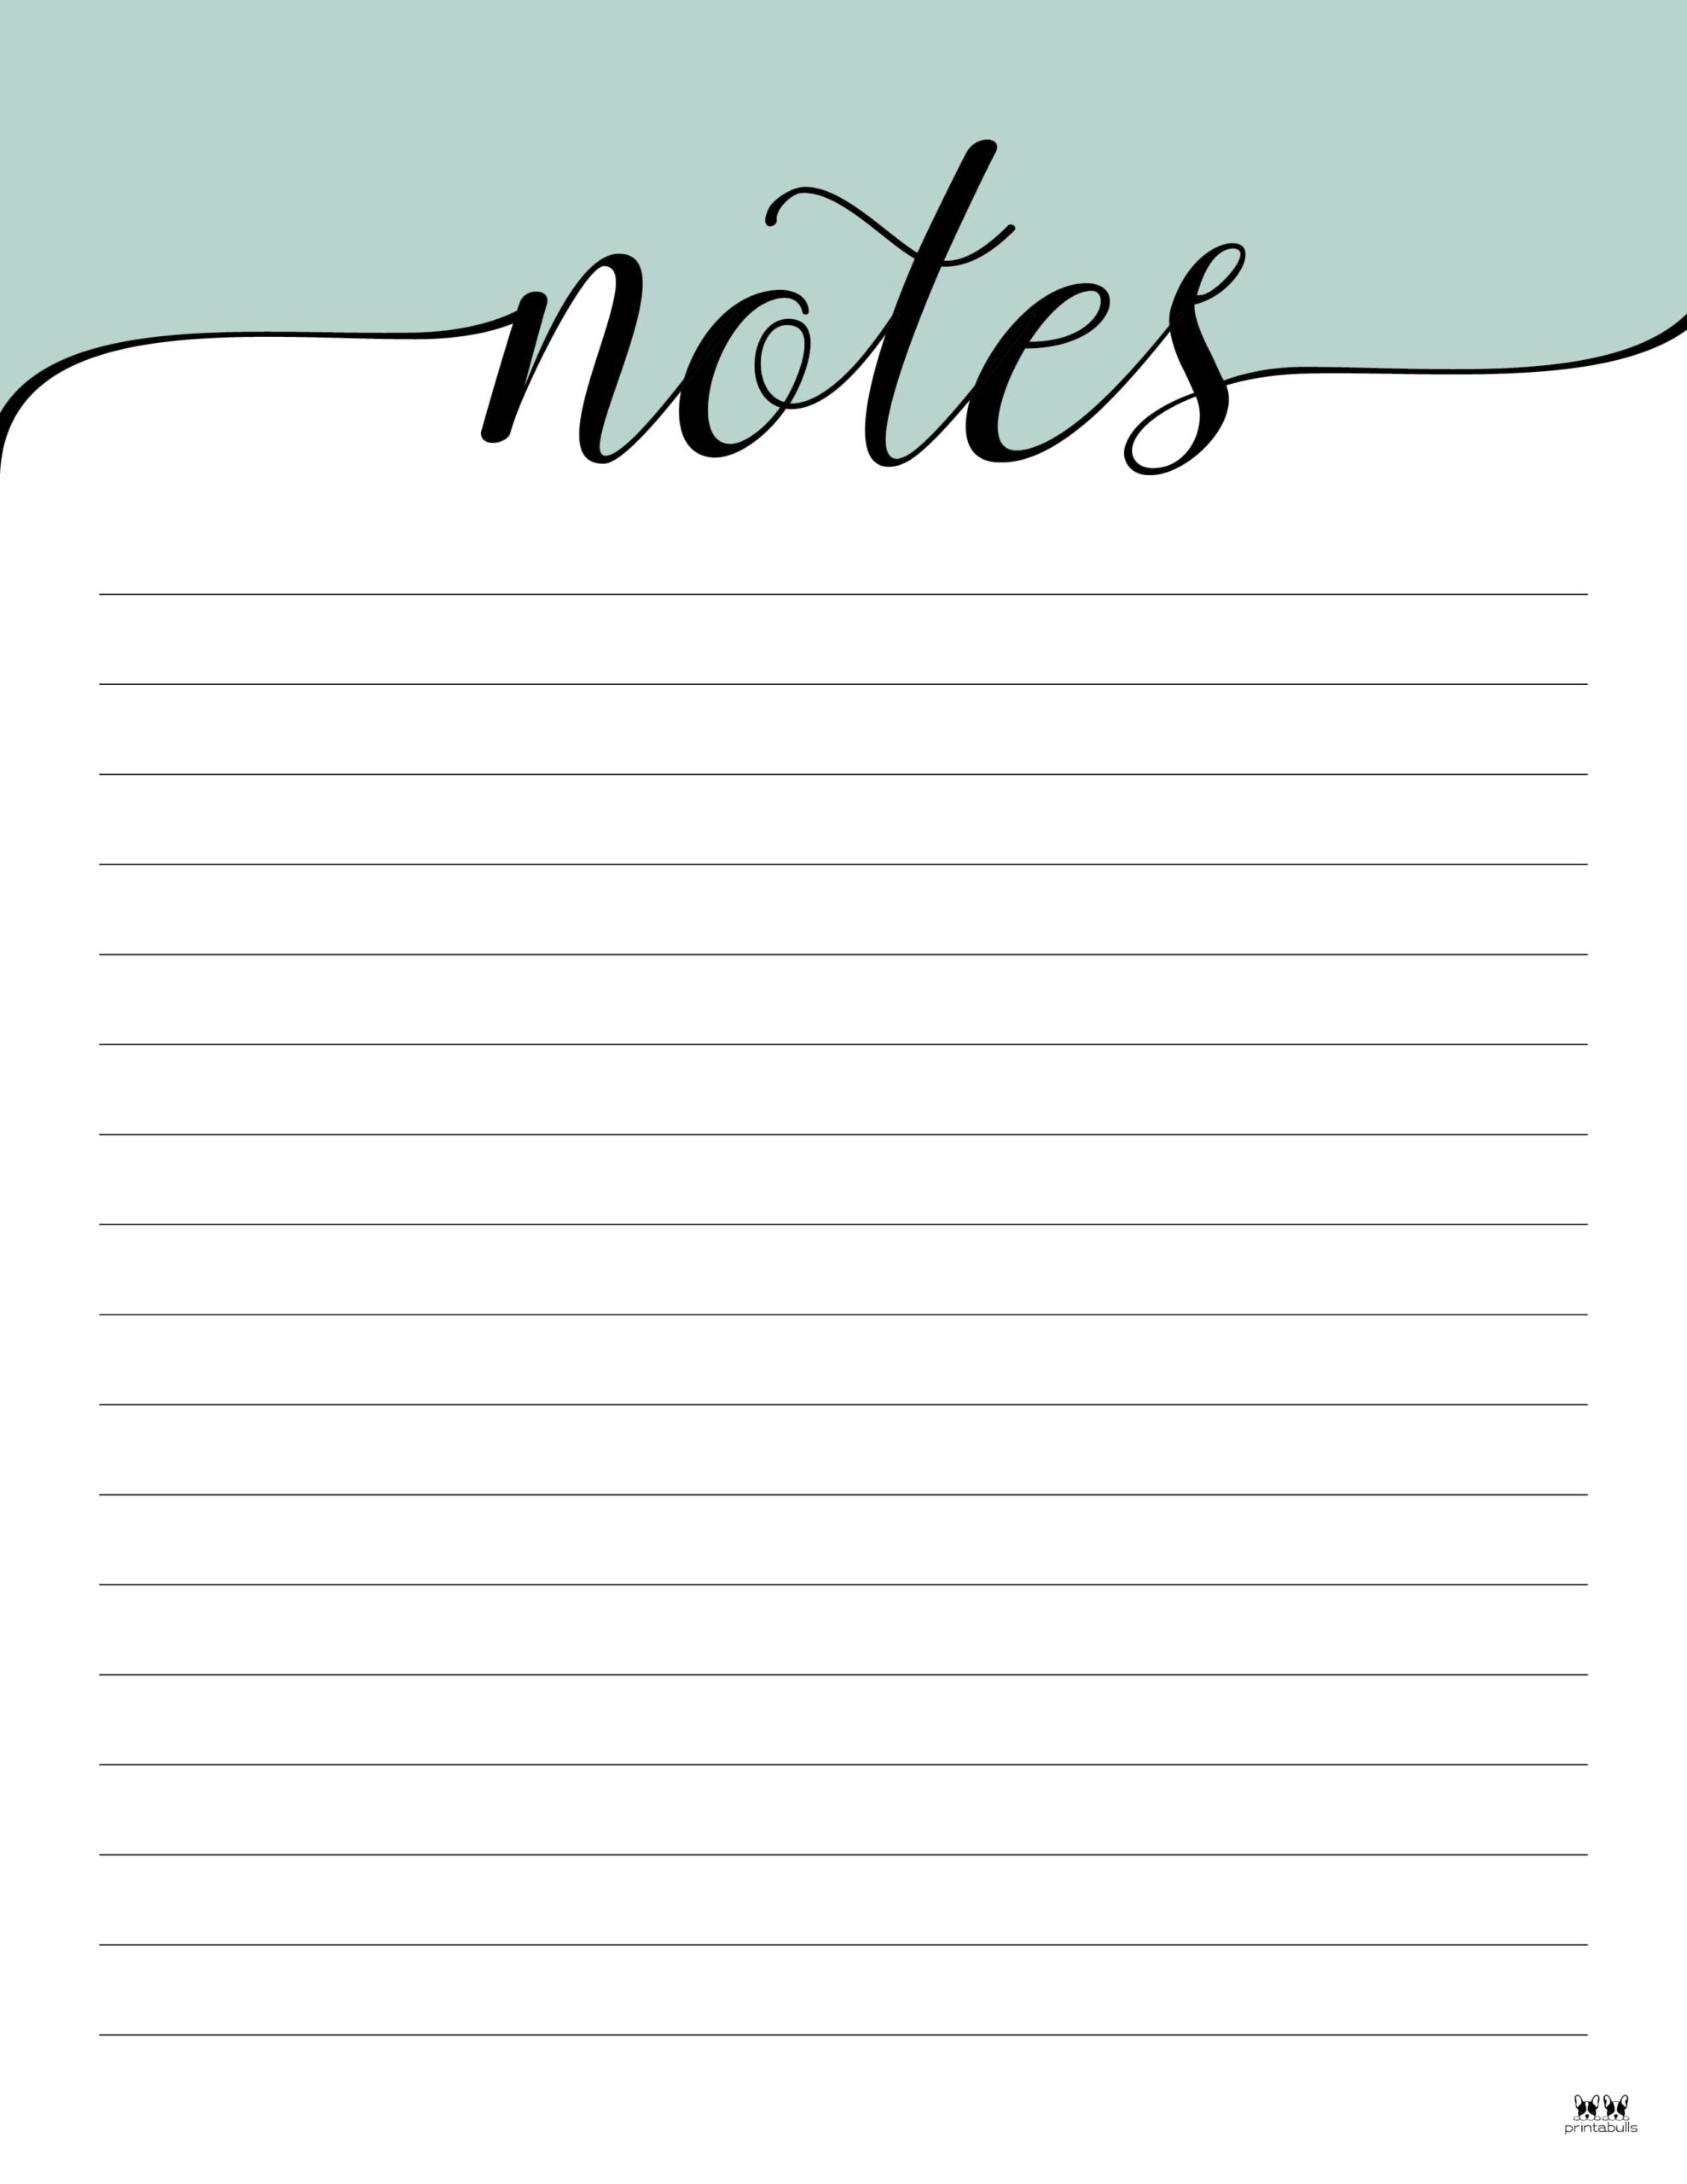 Note Pages Templates 30 FREE Printables PrintaBulk